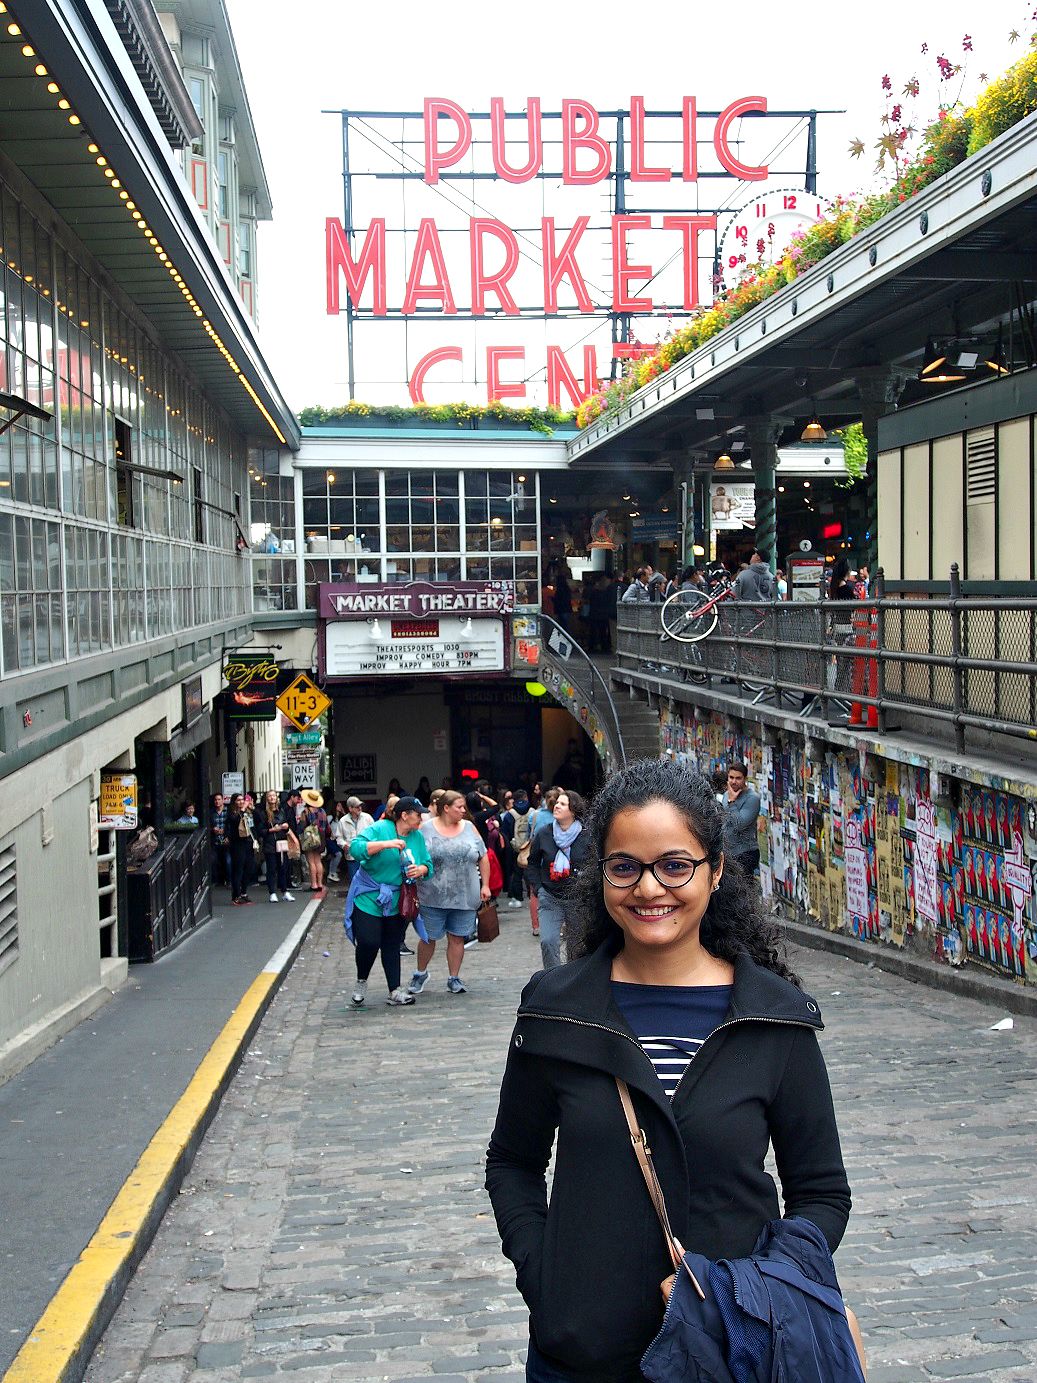 Pike Place Market: The Soul of Seattle